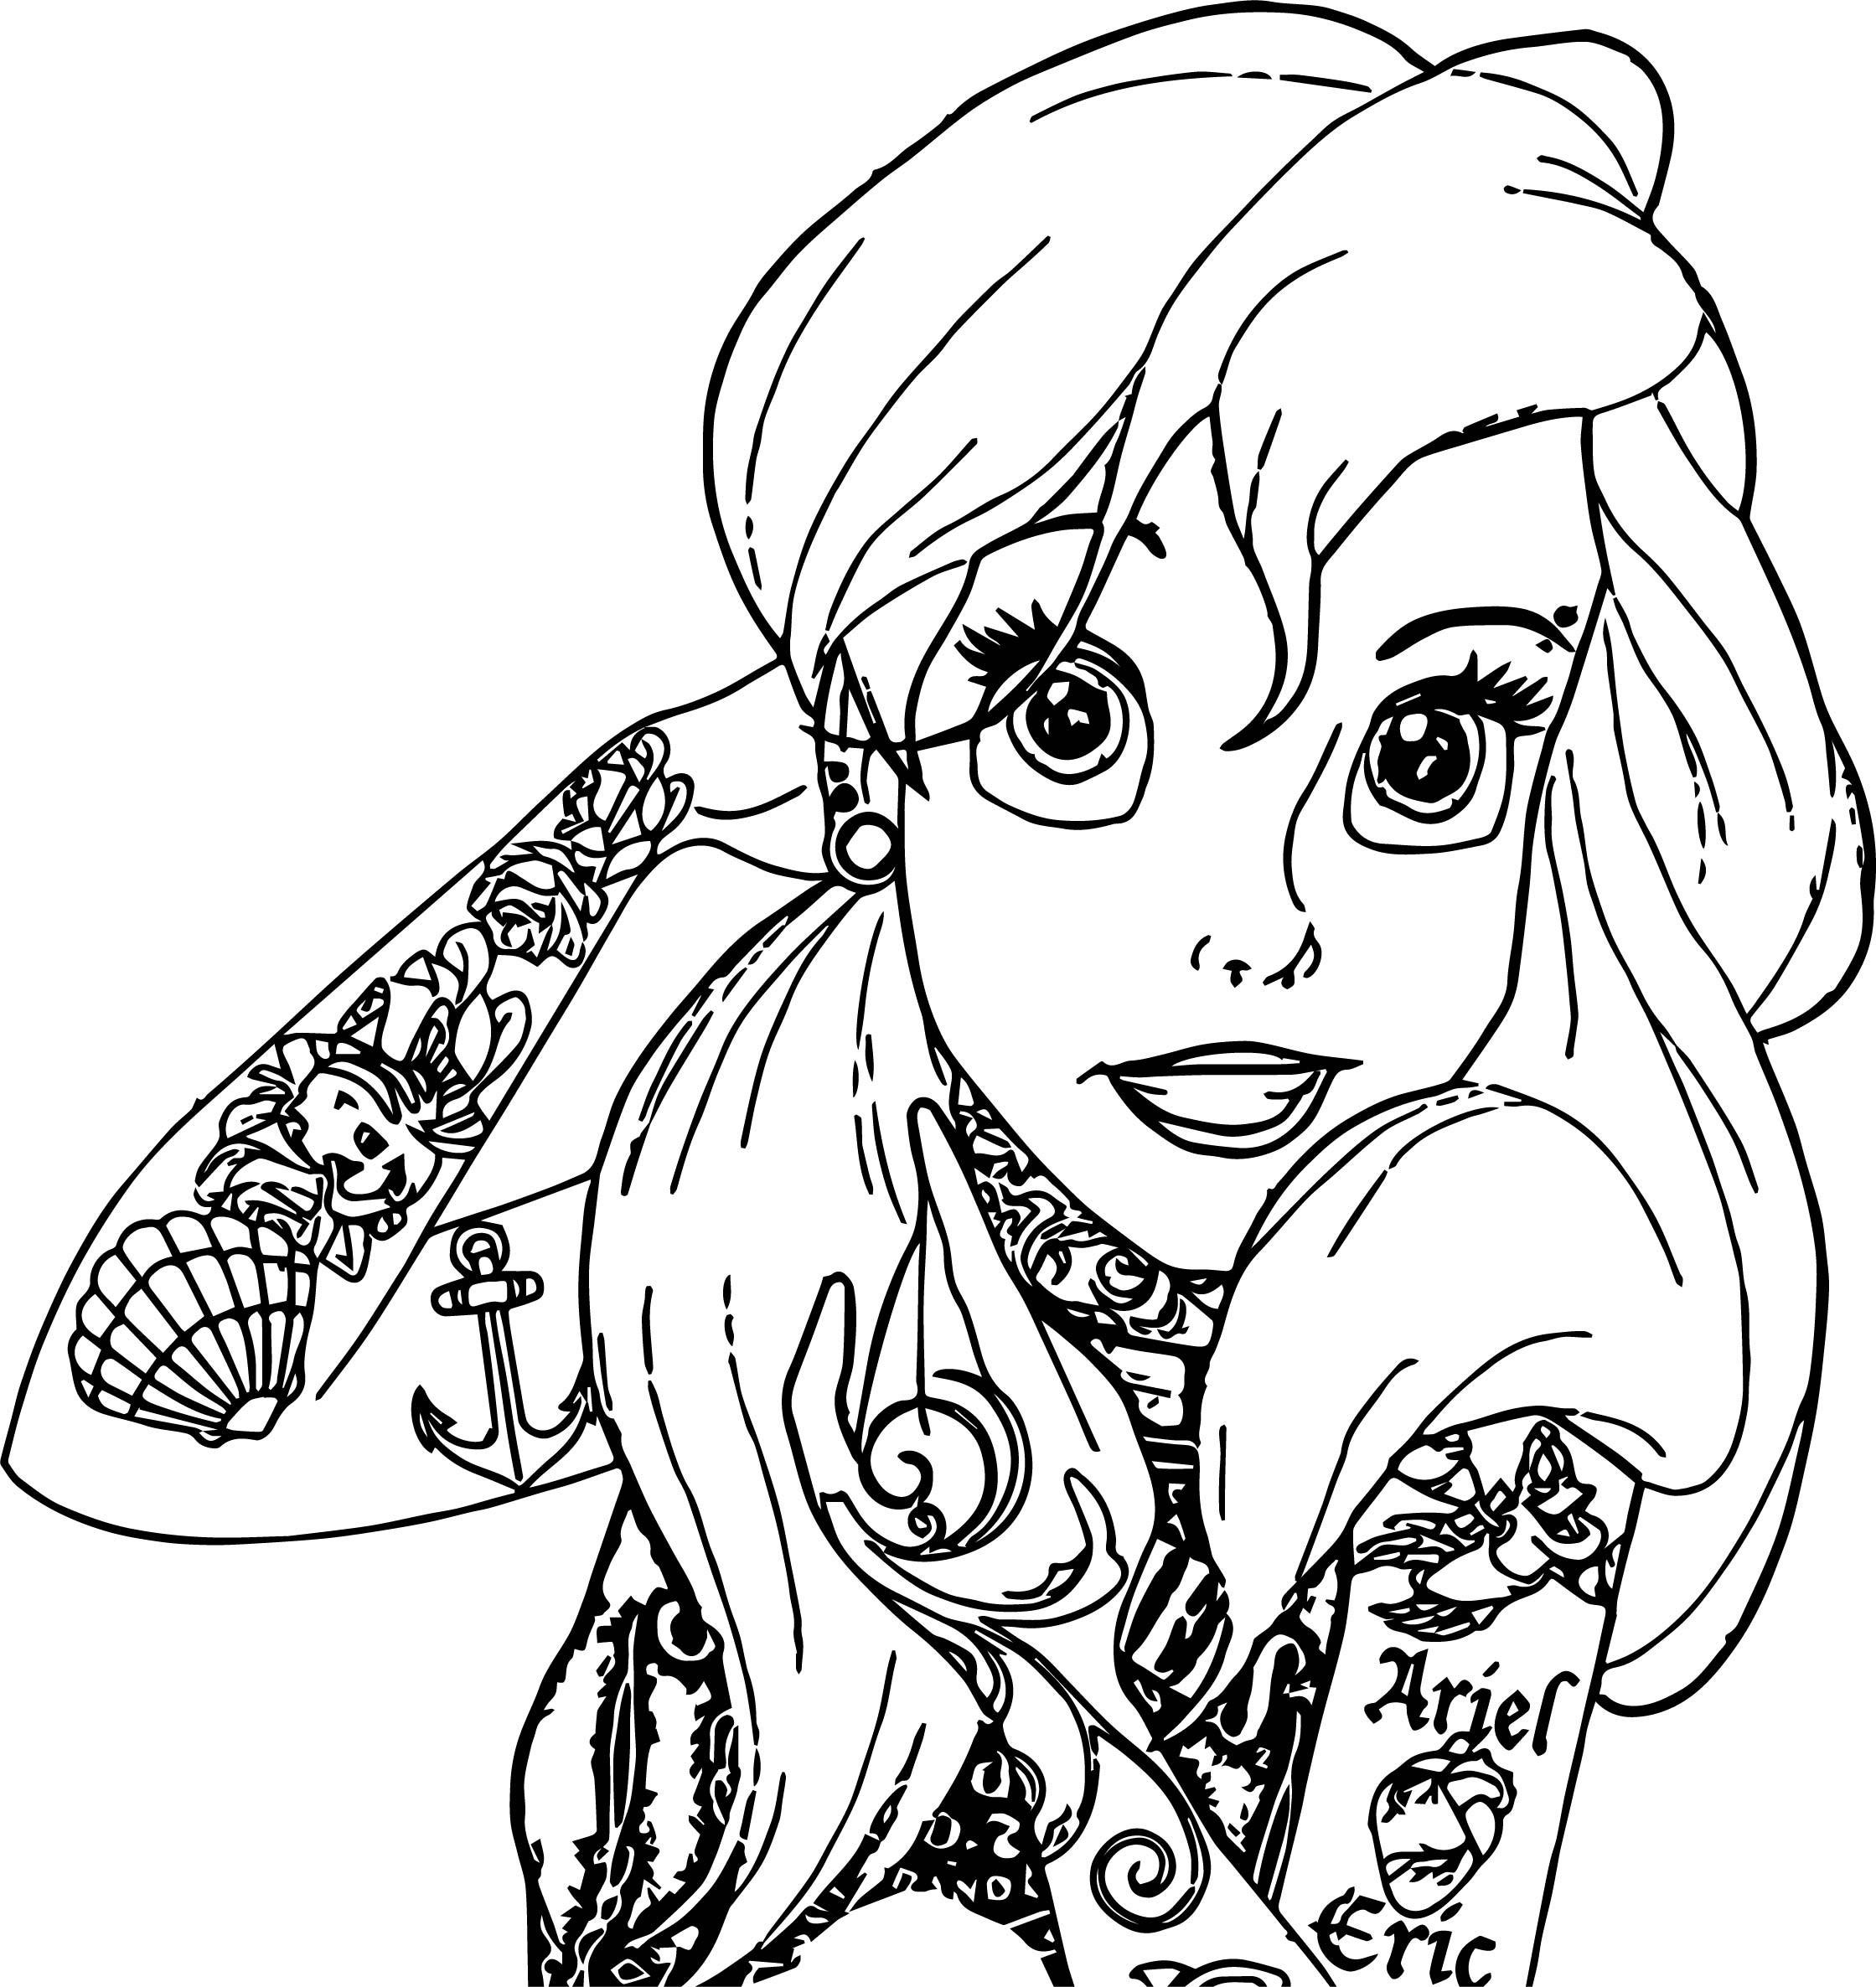 Tattooed Disney Princess Coloring Pages Wallpaper